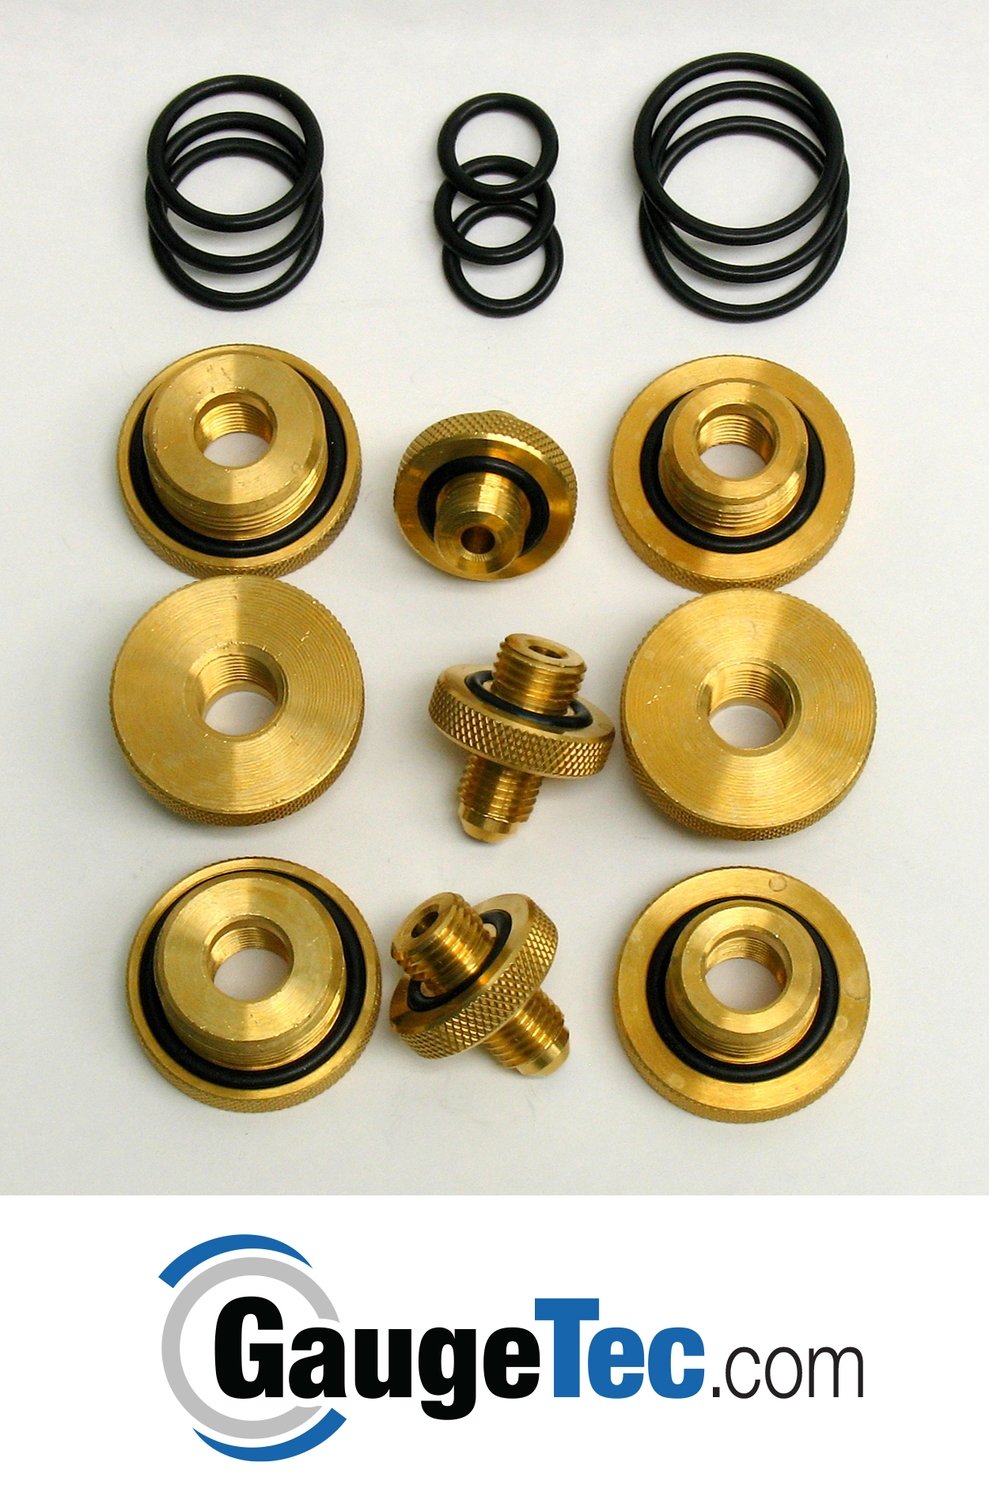 Mid-West Instrument Part No. 110617 Quick Connect Test Cock Adapter Kit (Complete set of each of above 9 fittings)